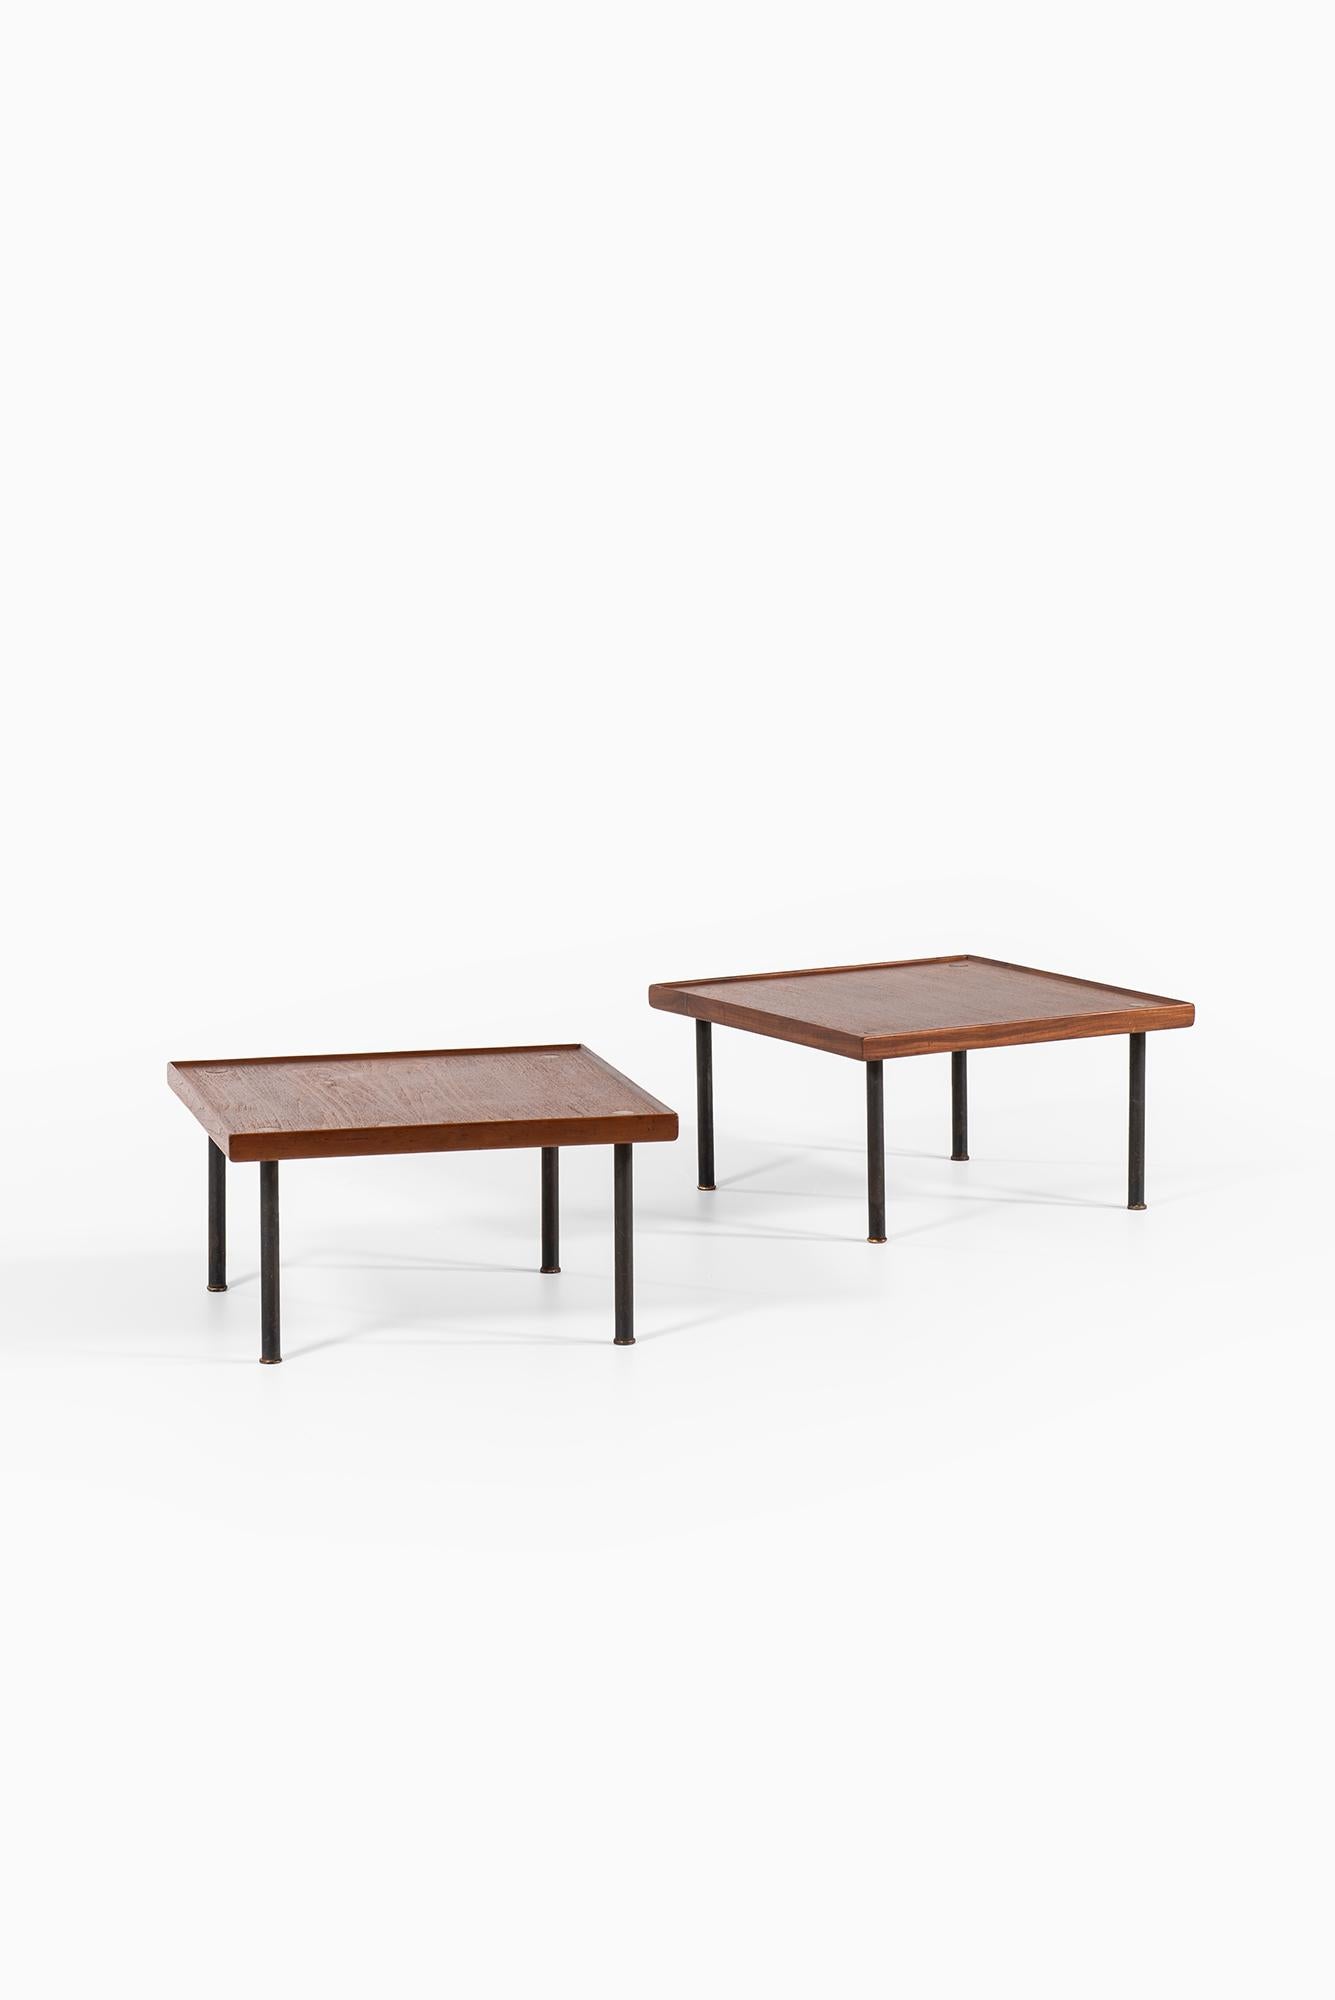 Rare pair of side tables designed by Melchiorre Bega. Produced by Klan in Italy.